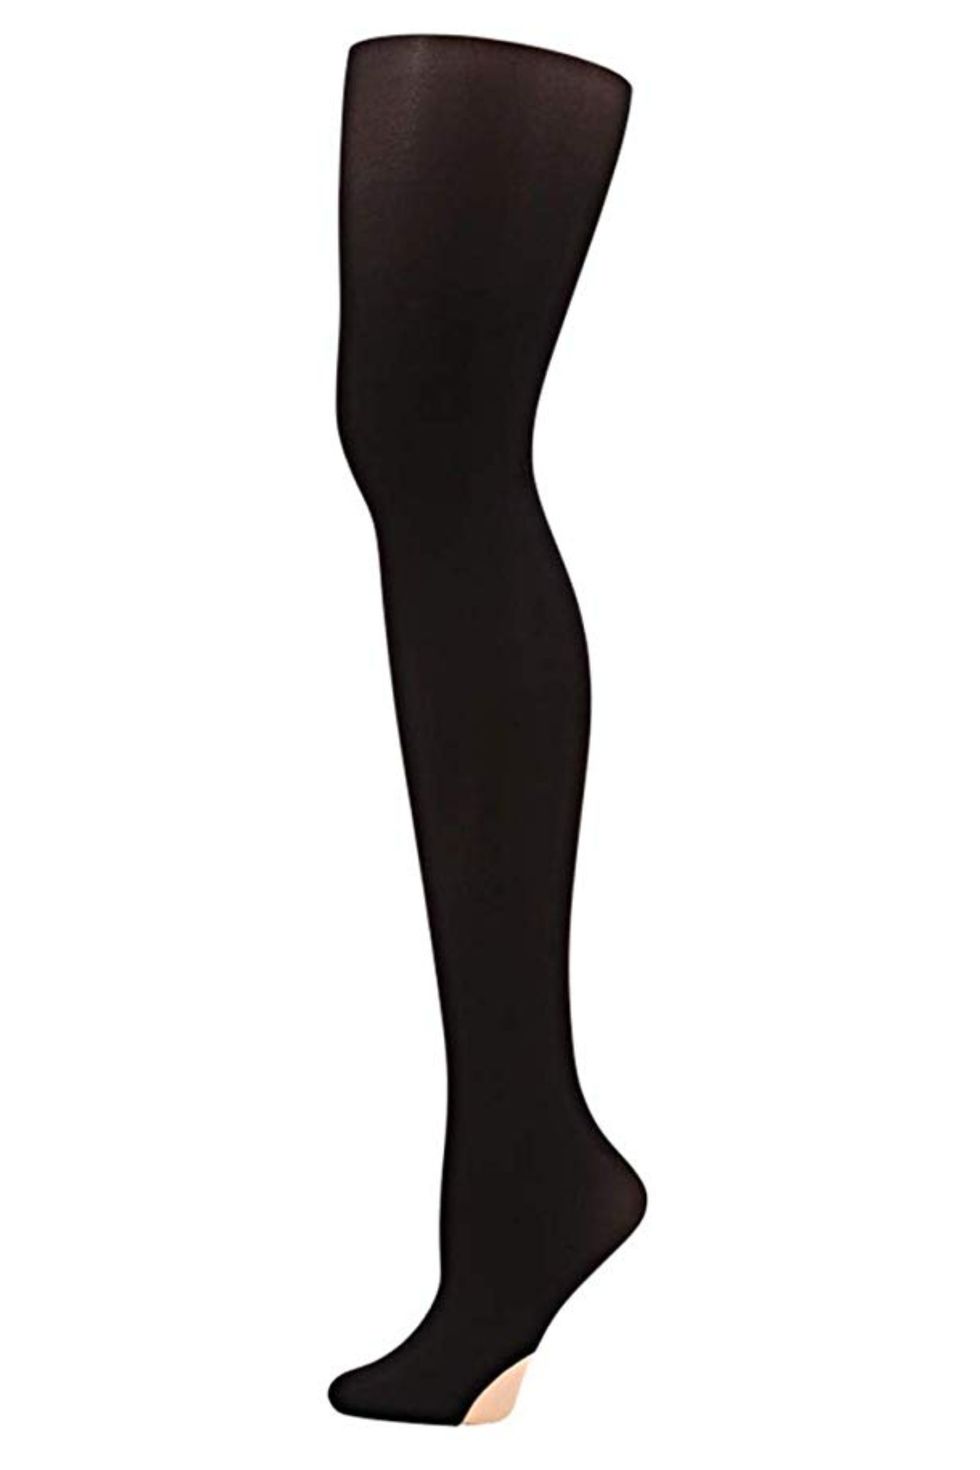 14 Best Black Tights for Women - Top Rated Pantyhose and Hosiery